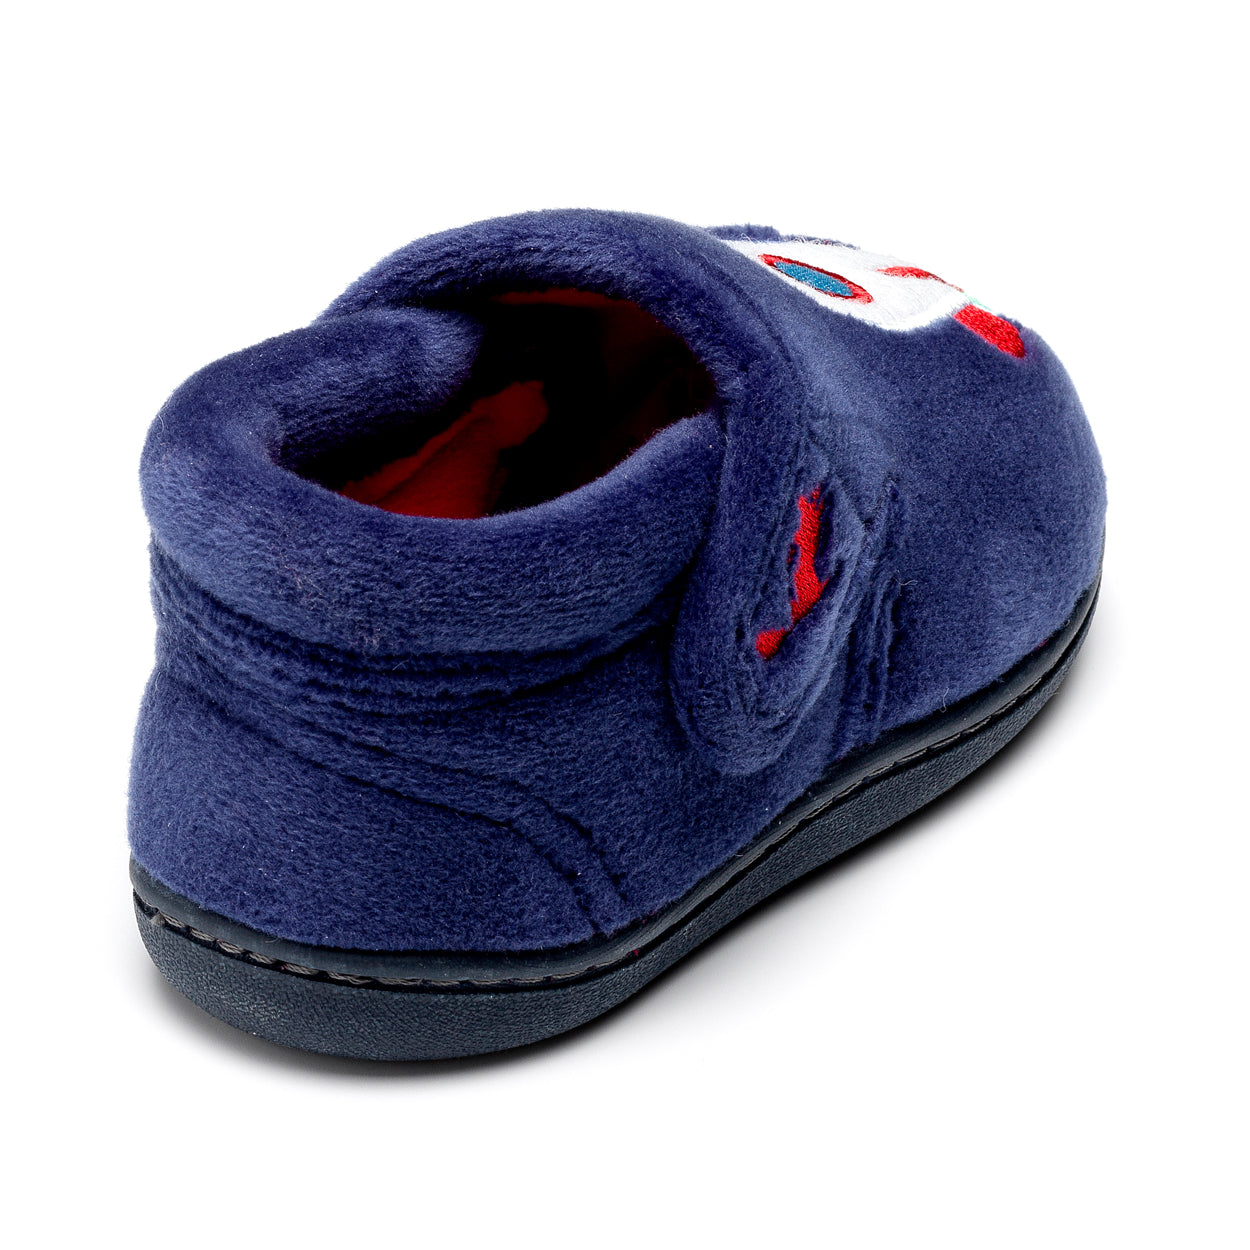 A boys slipper by Chipmunks, style Blast, in navy multi with rocket design and velcro fastening. Angled view.